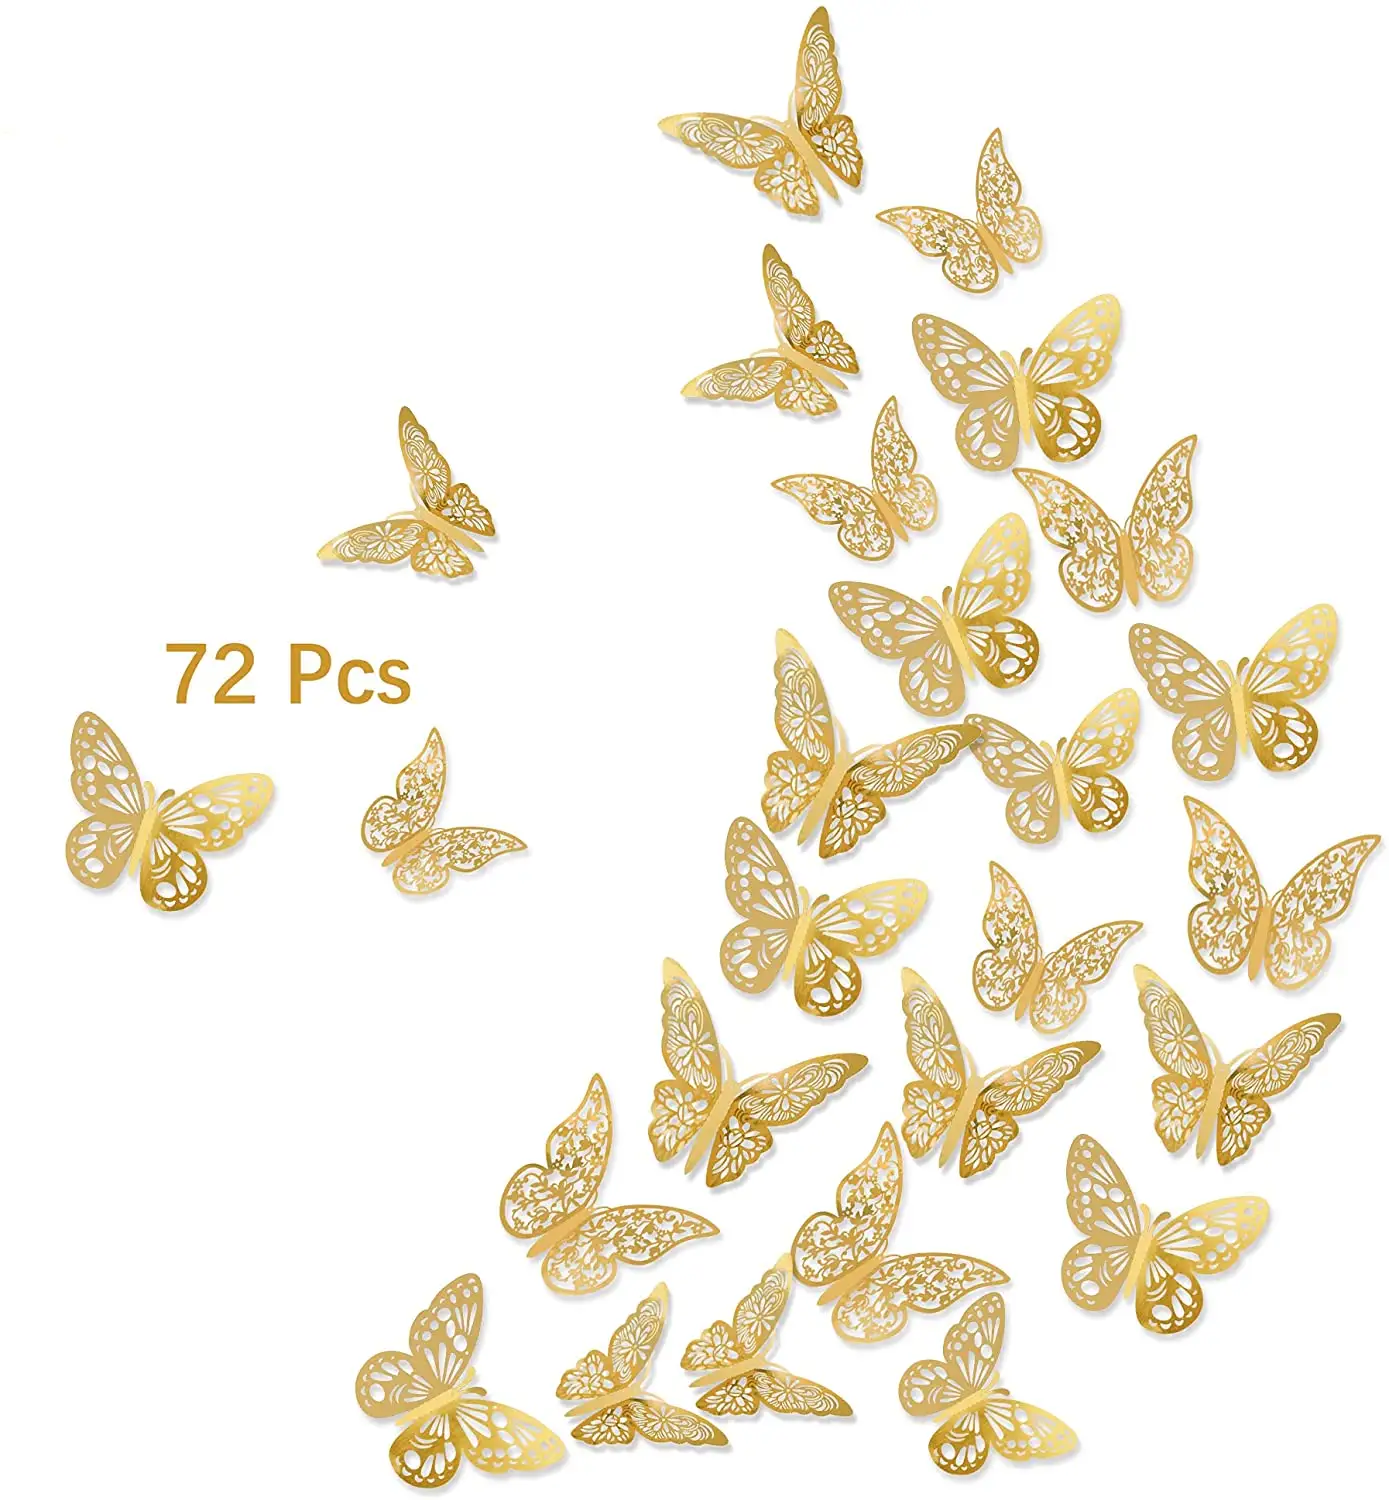 3D Gold Hollow-Out Butterfly Party Home Cake Decorations Art Removable Stickers Wall Decor